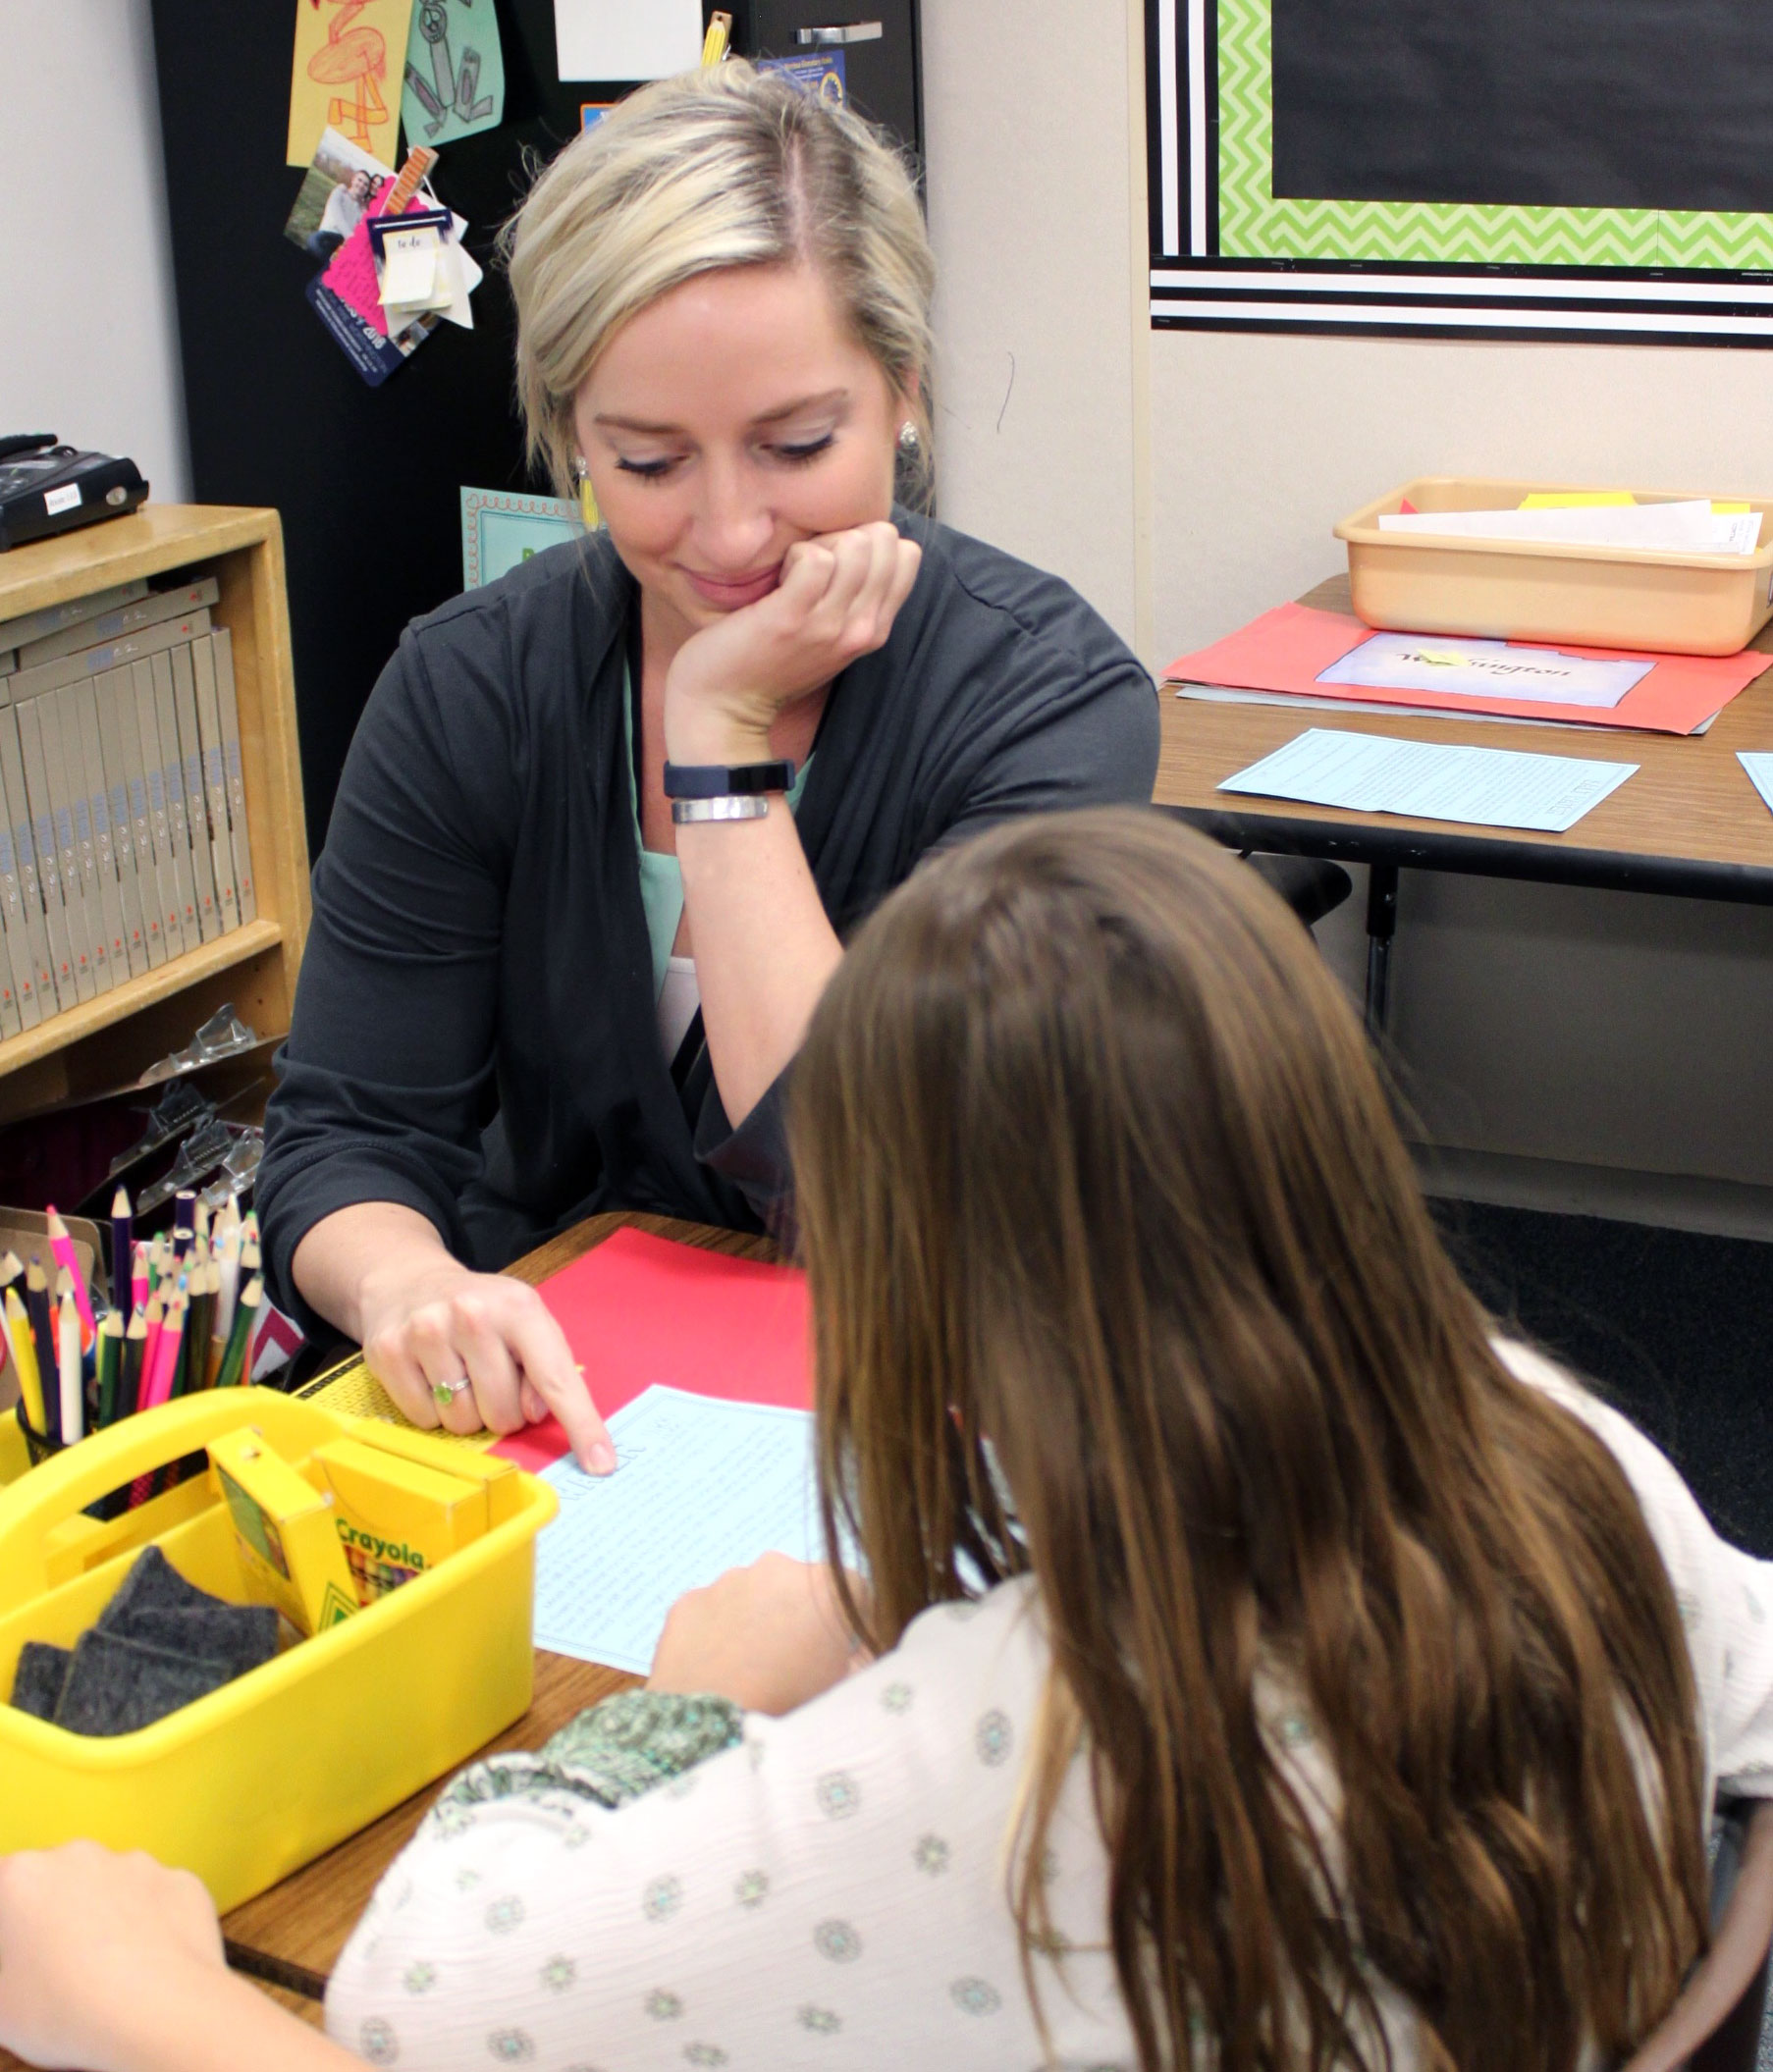 A student teacher works with a student